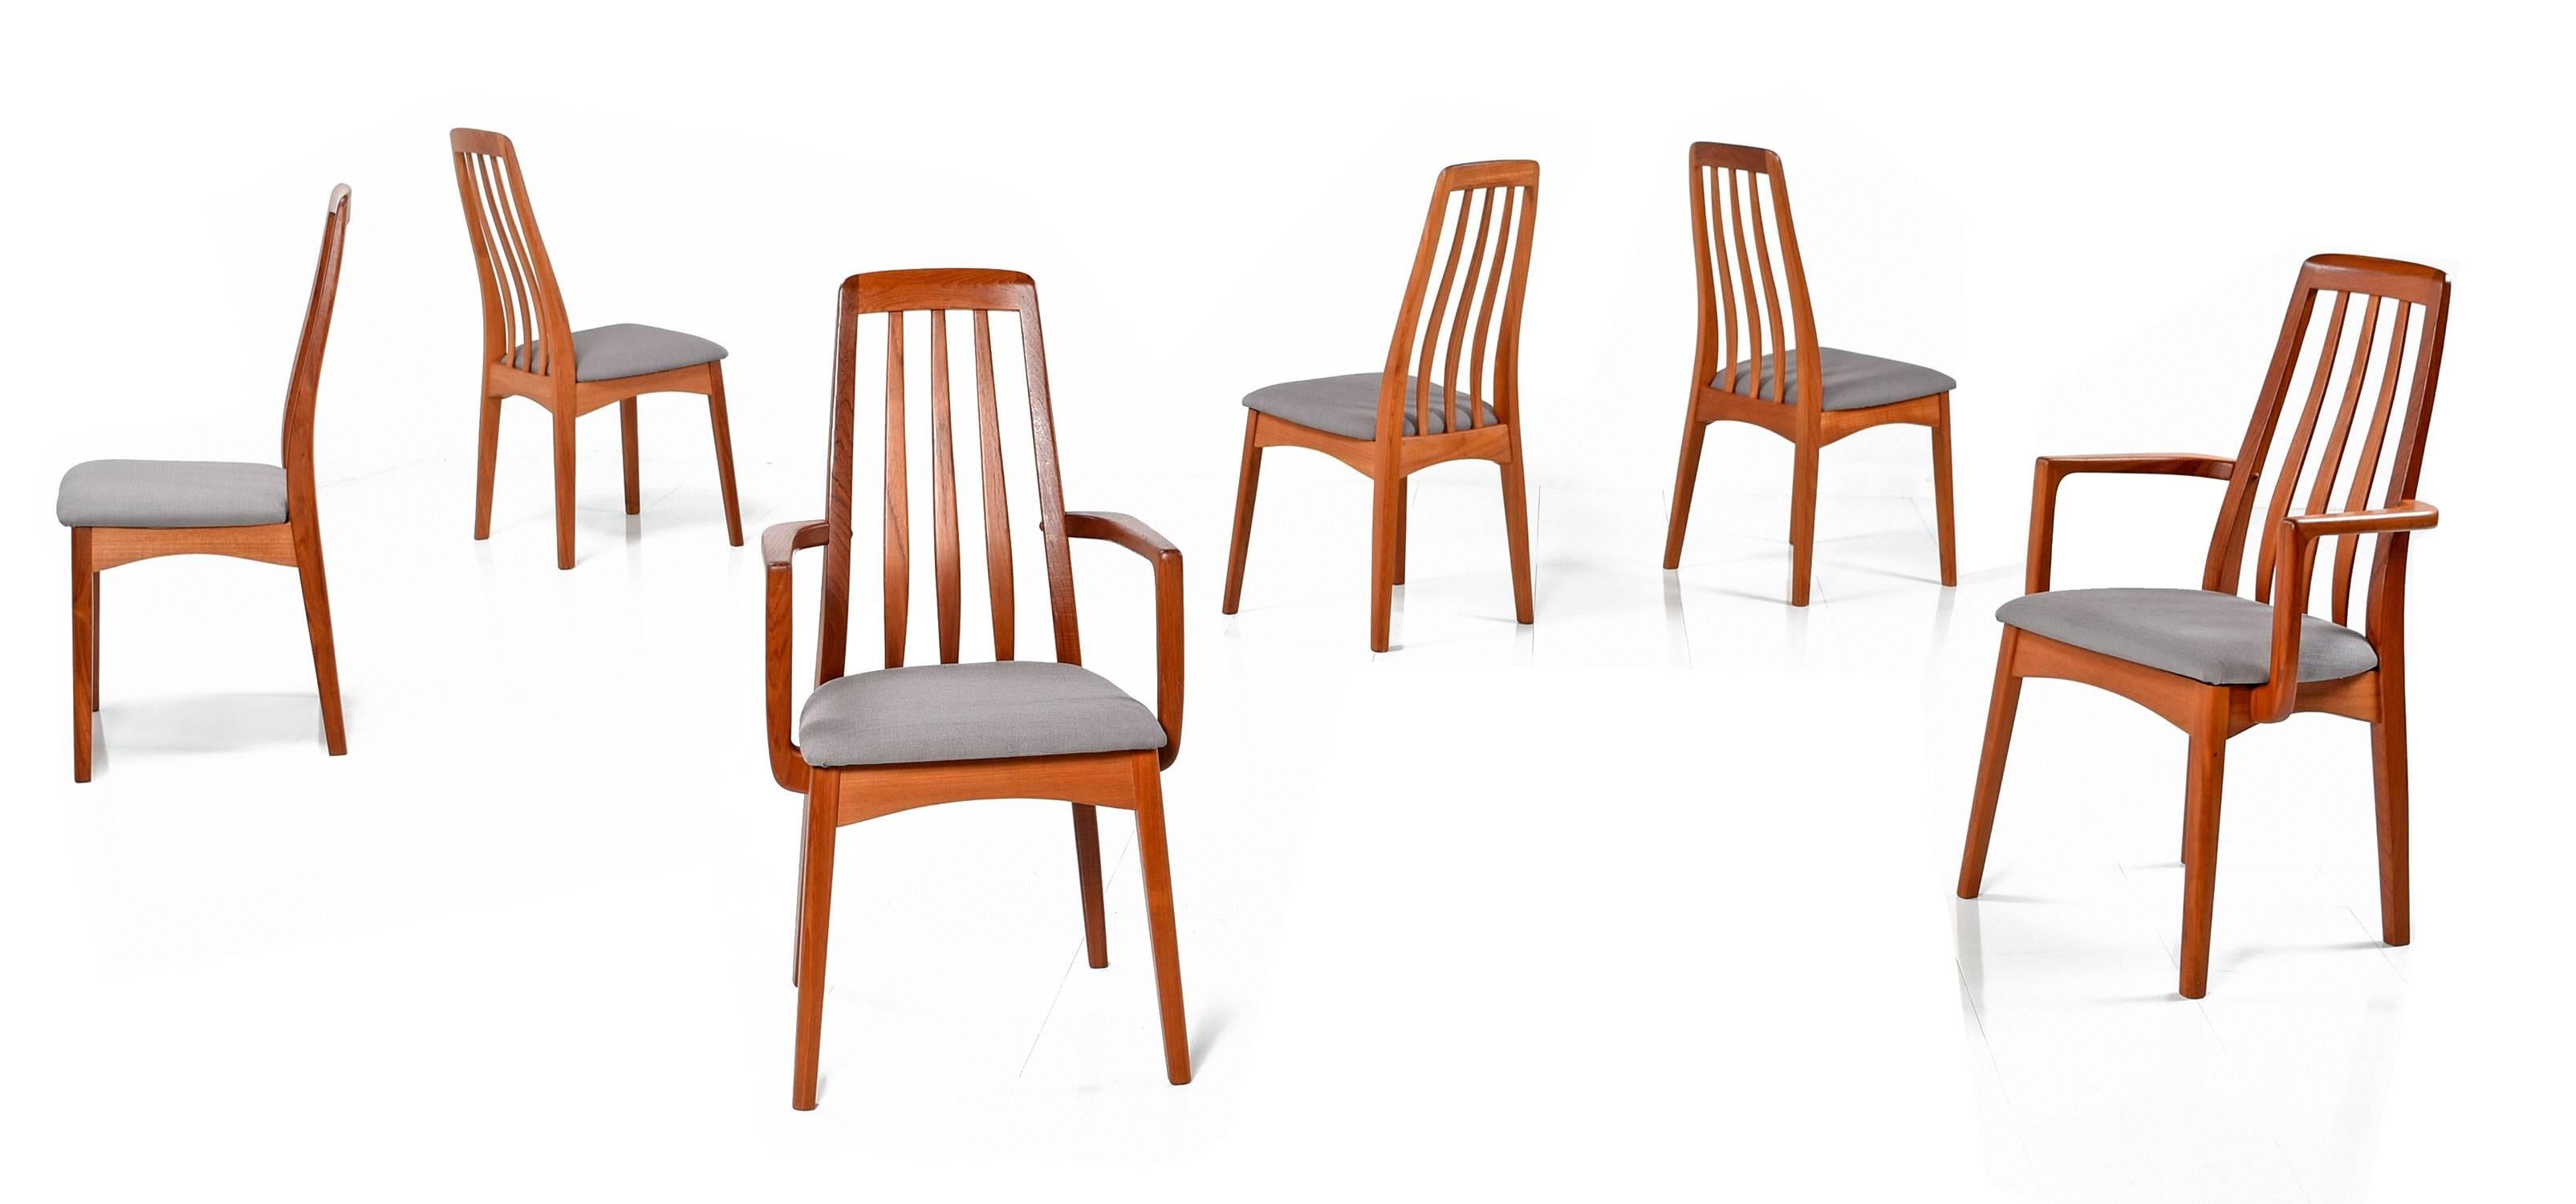 Set of six pre-owned Danish Modern style Benny Linden teak dining chairs with new grey upholstery on the seats. The group includes two armchairs and four armless side chairs. The solid teak chairs are made in Thailand and bear the maker's mark.